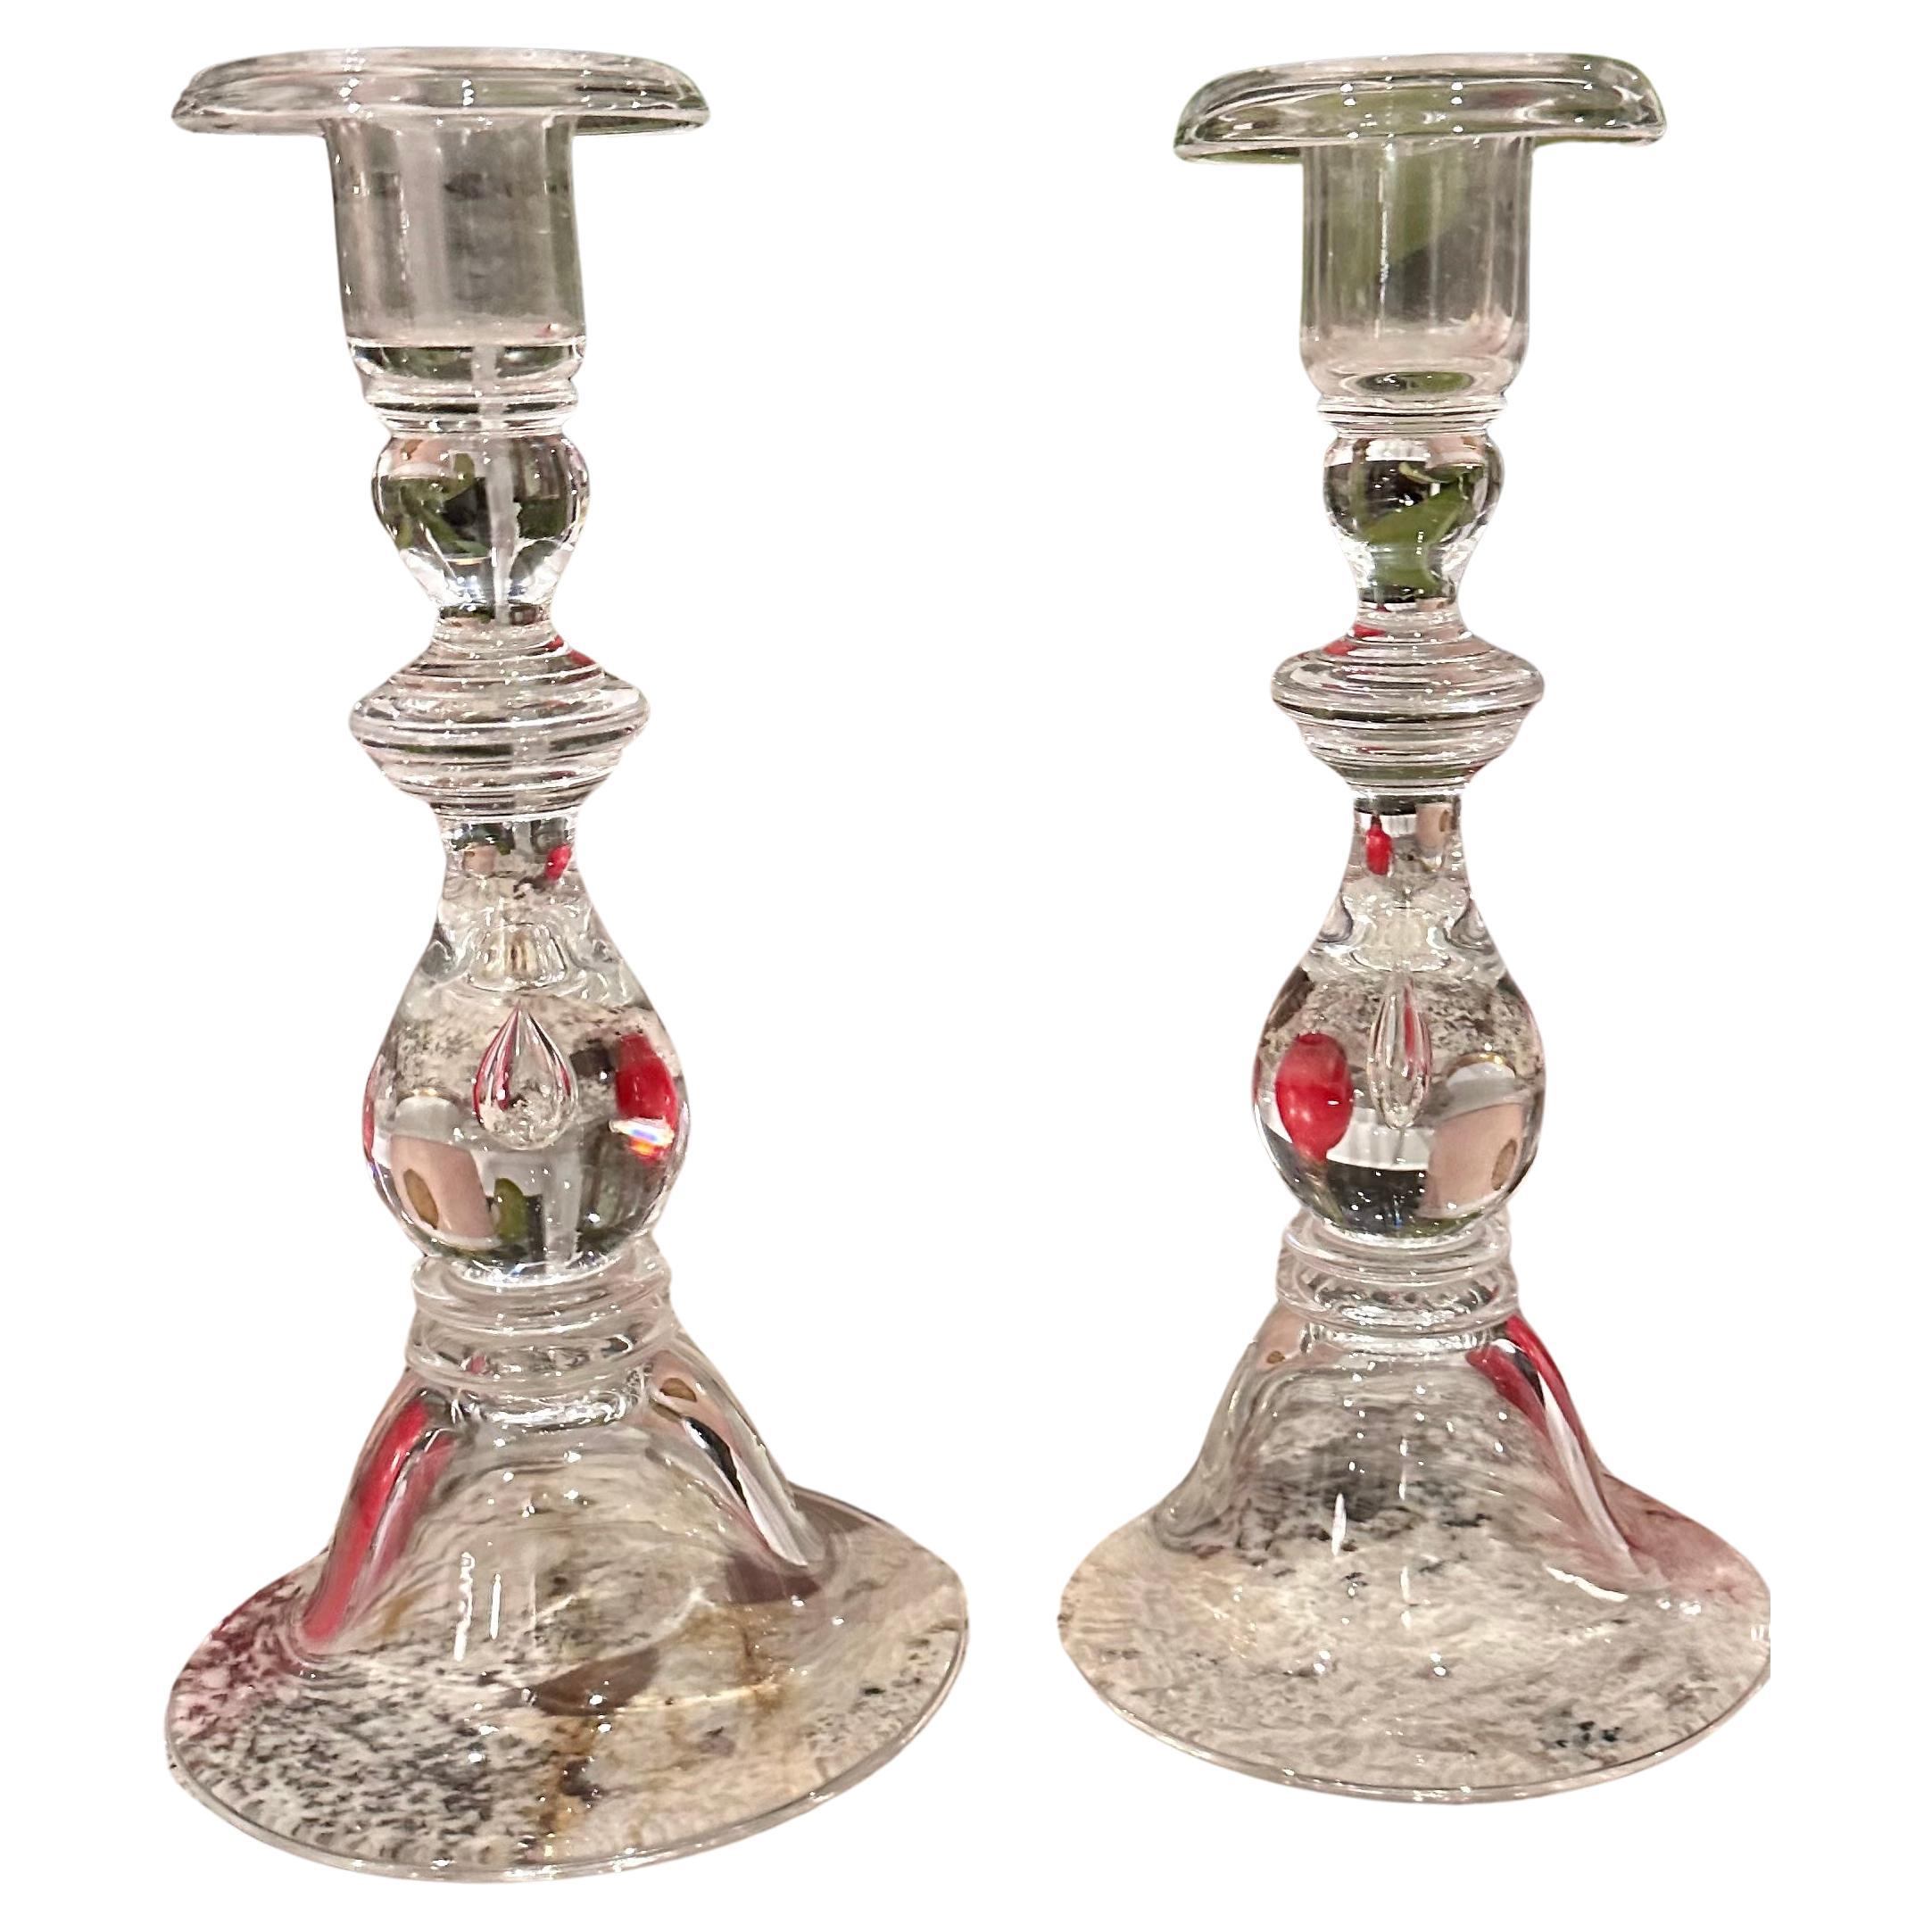 Pair of Signed Steuben Mid Century Modern Crystal Candlesticks